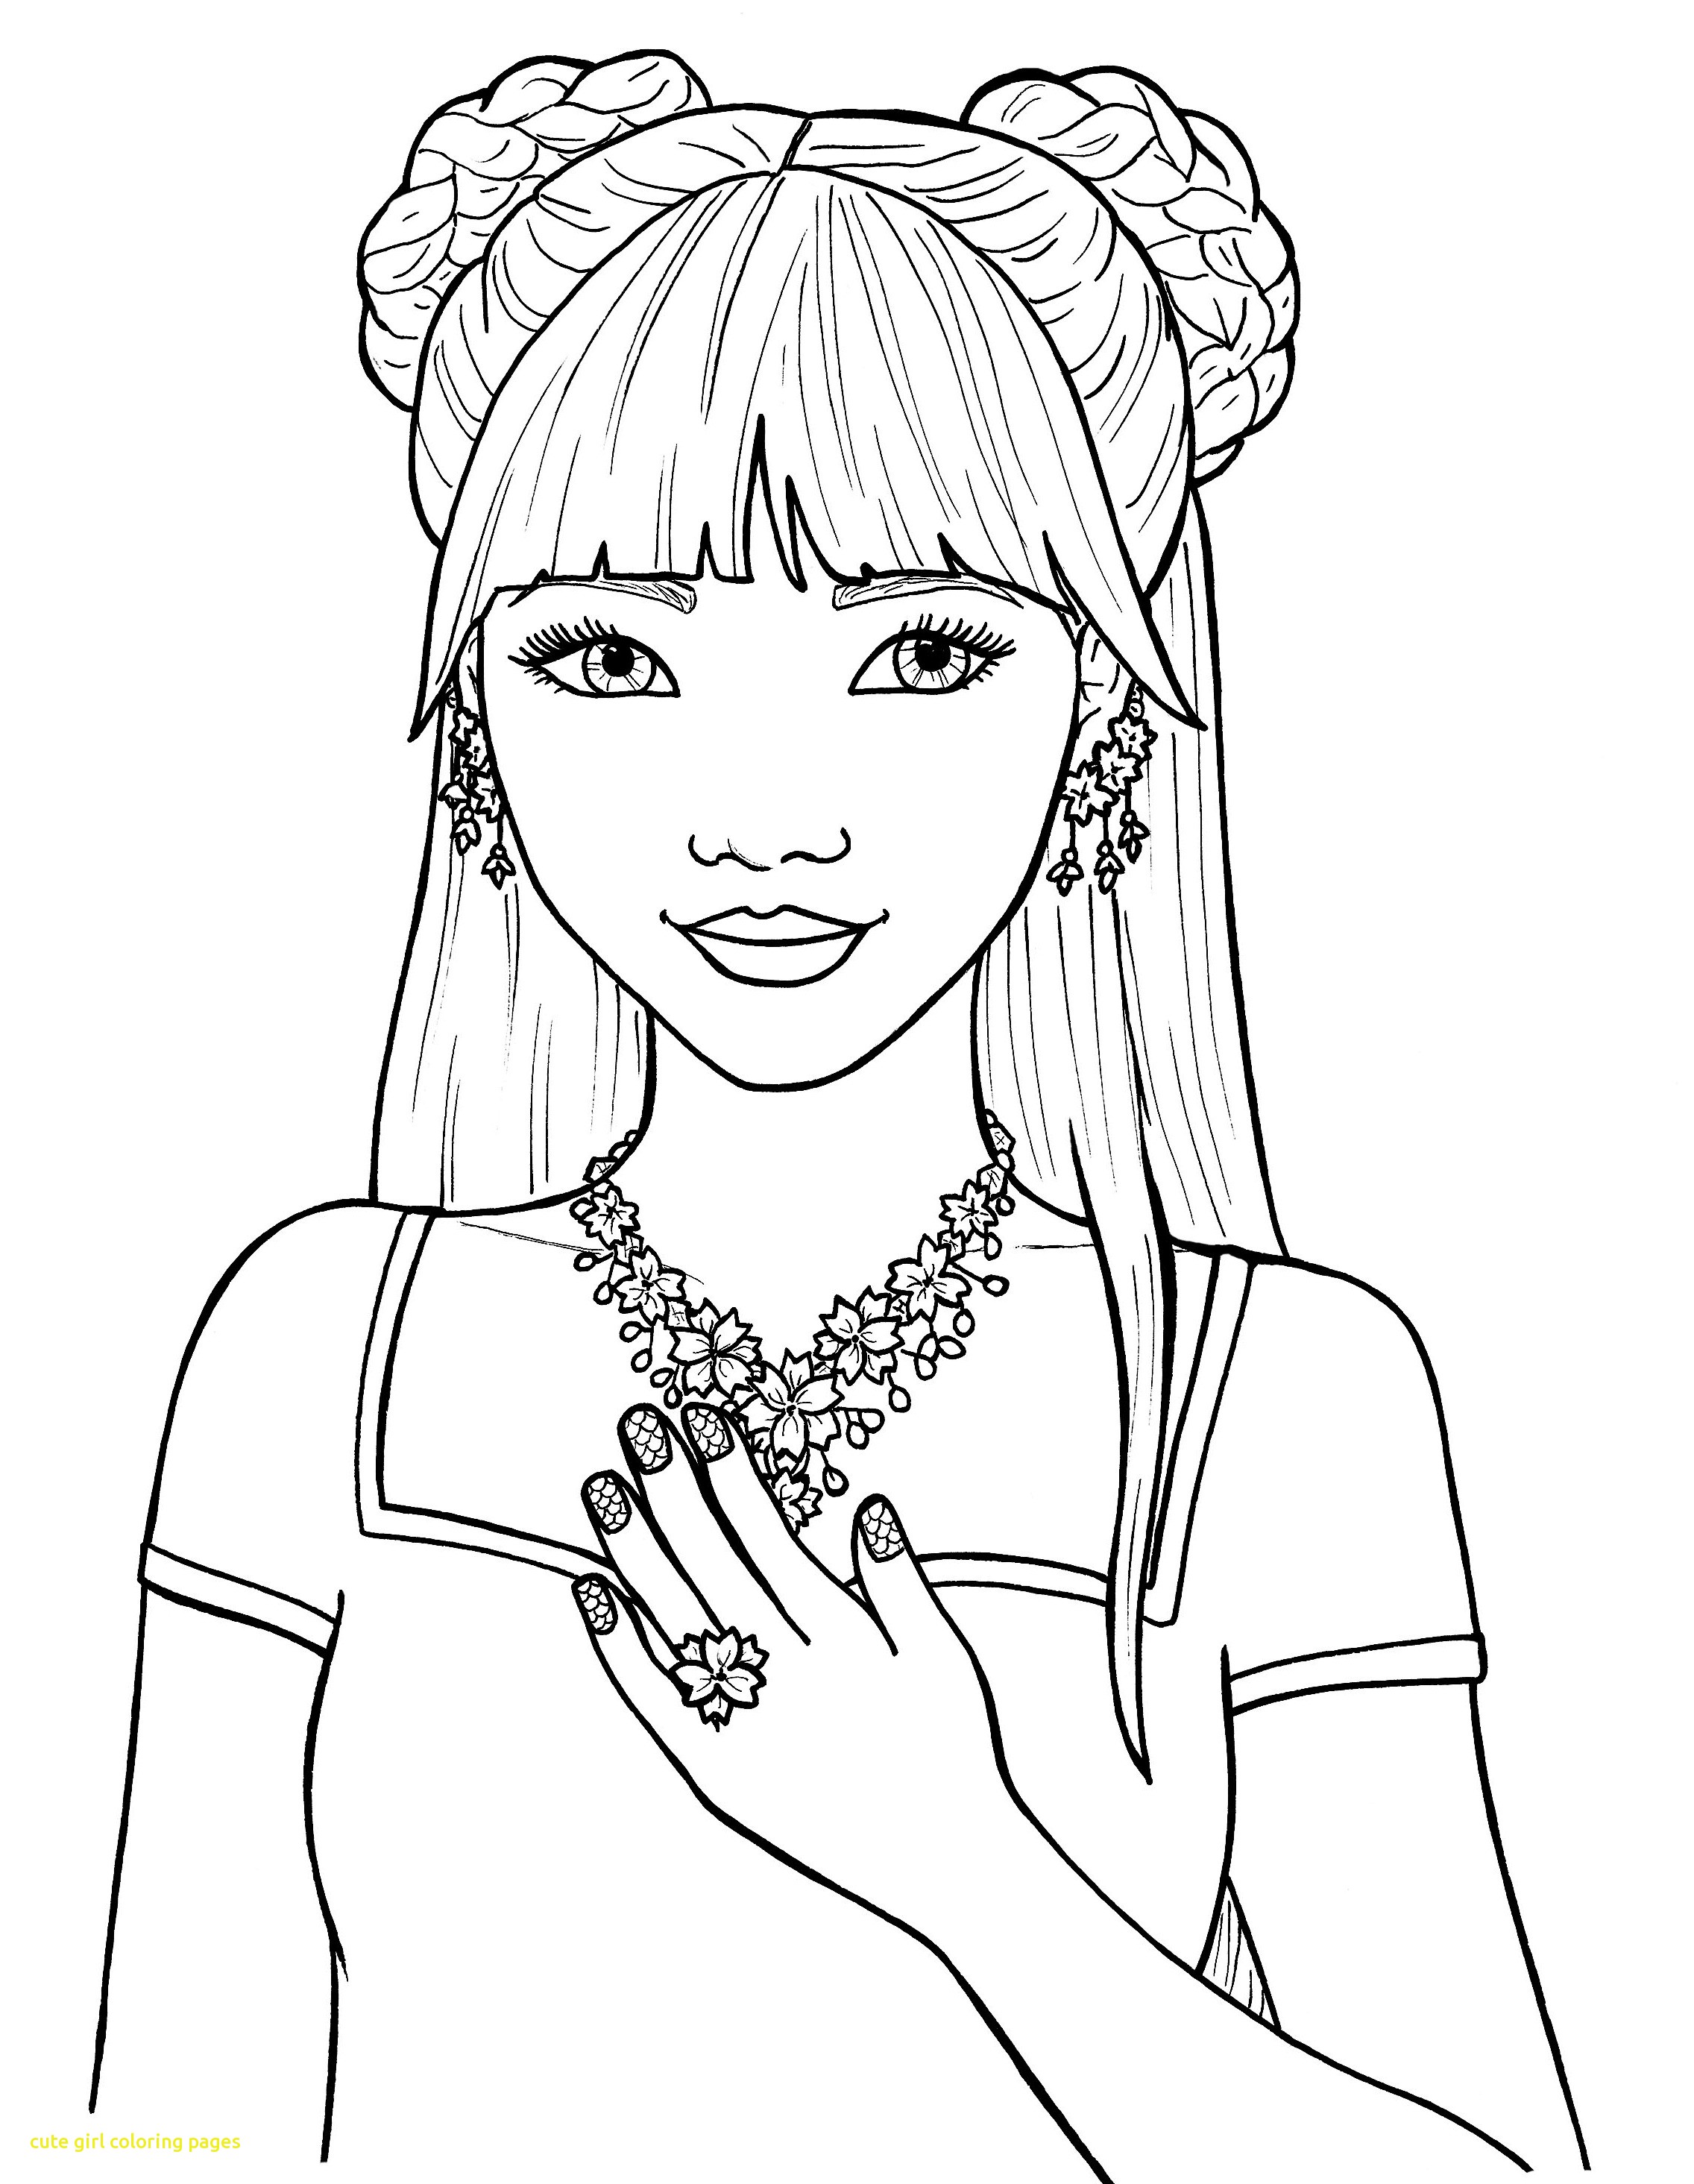 Coloring Pages For Girls   Best Coloring Pages For Kids   Coloring ...